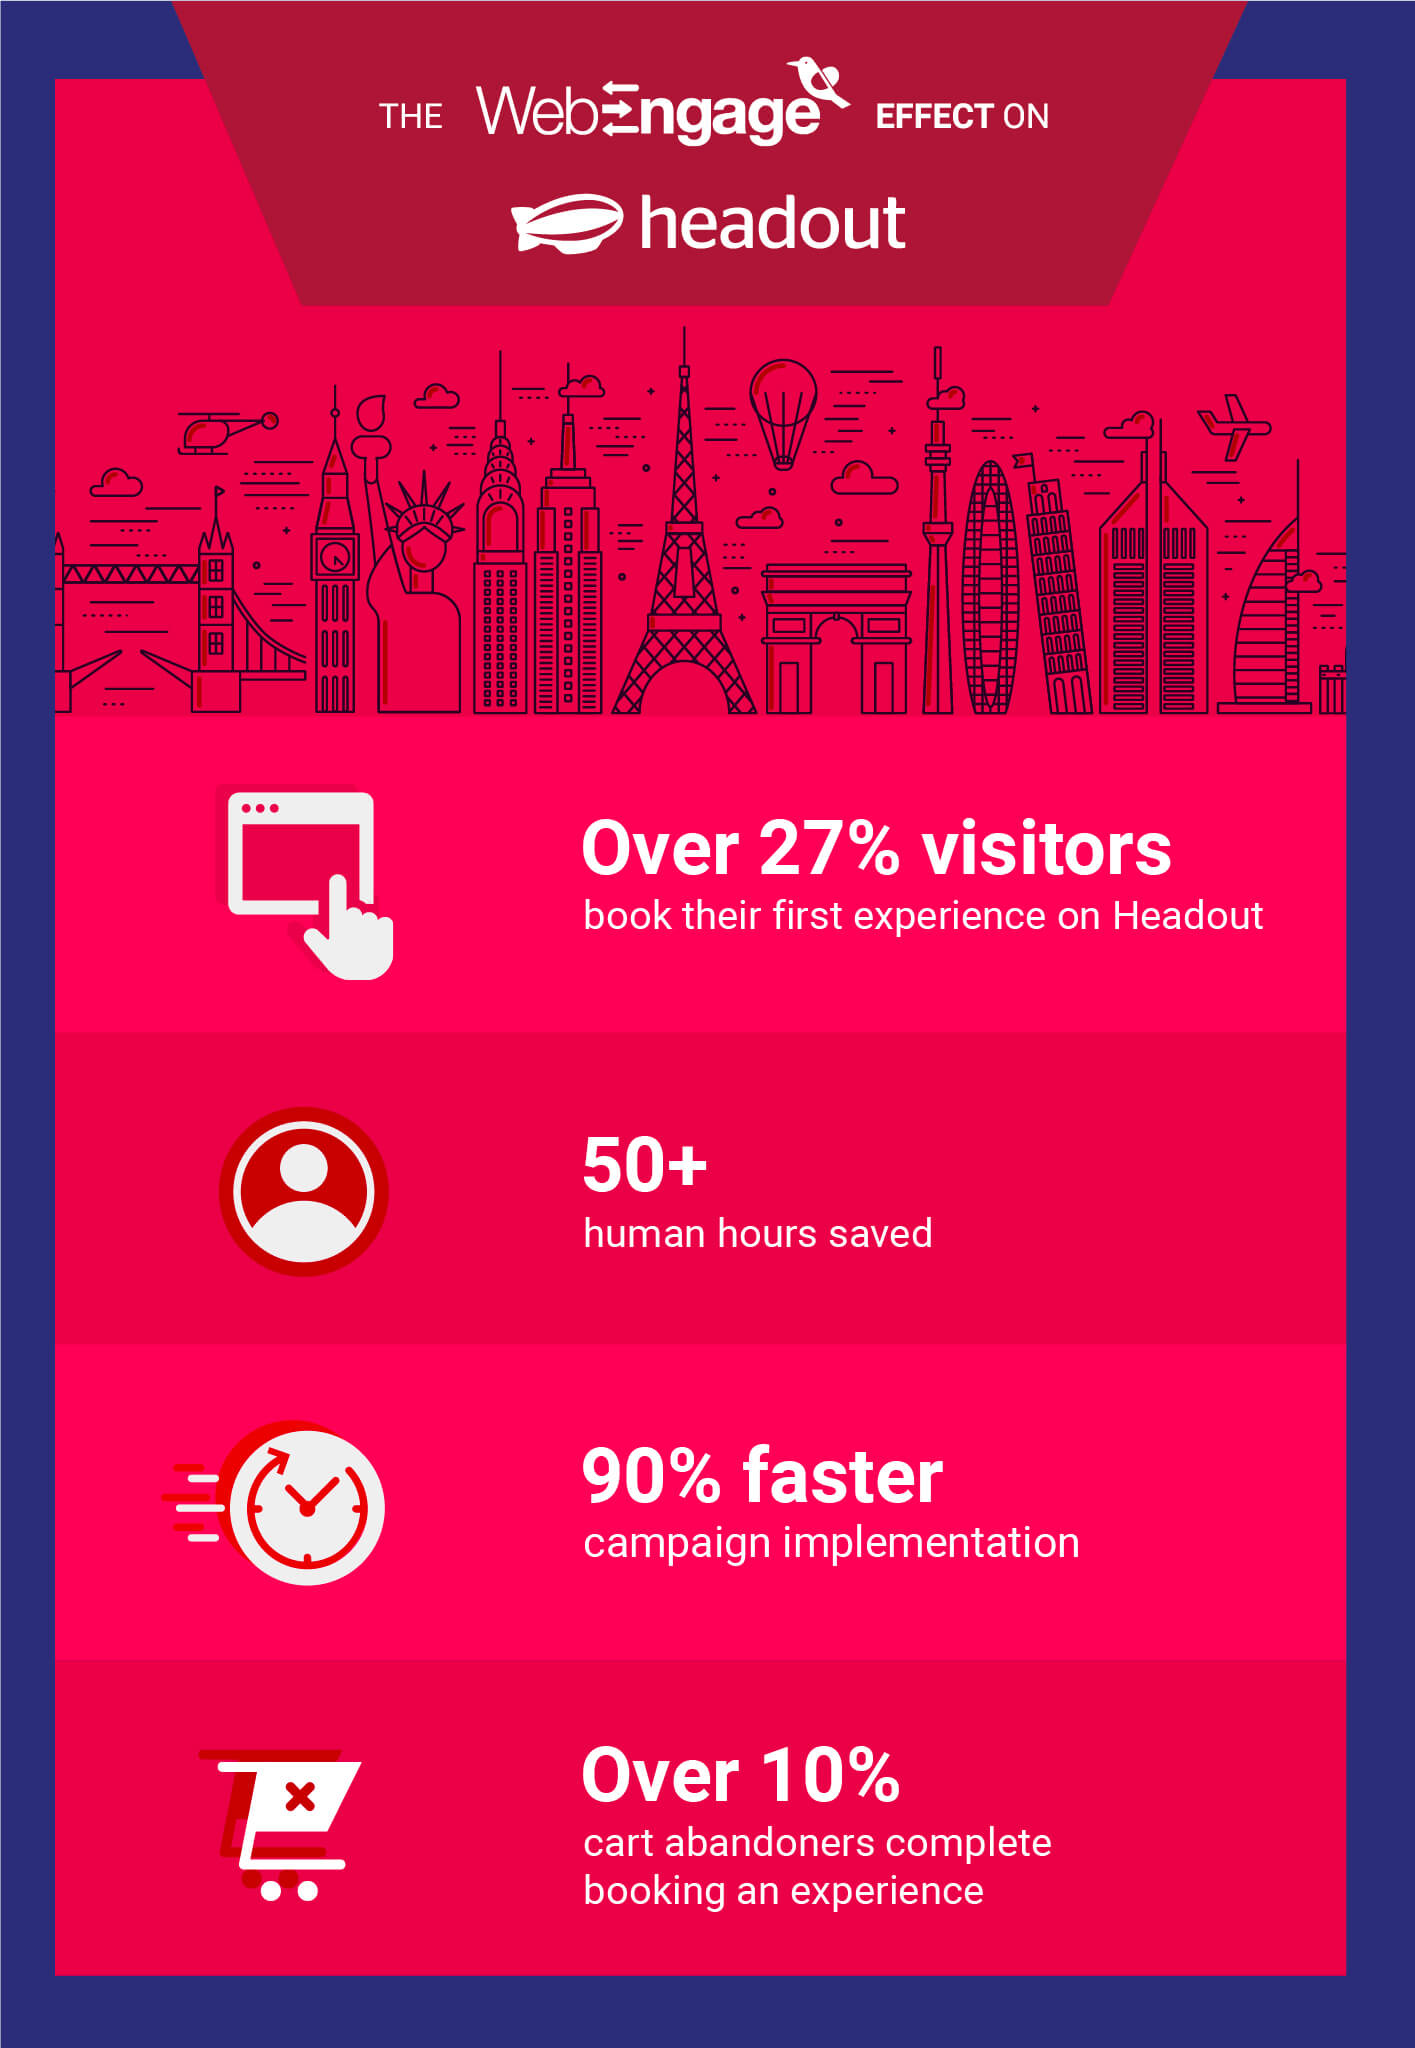 Headout carries out 90% faster campaign implementation | Case Study